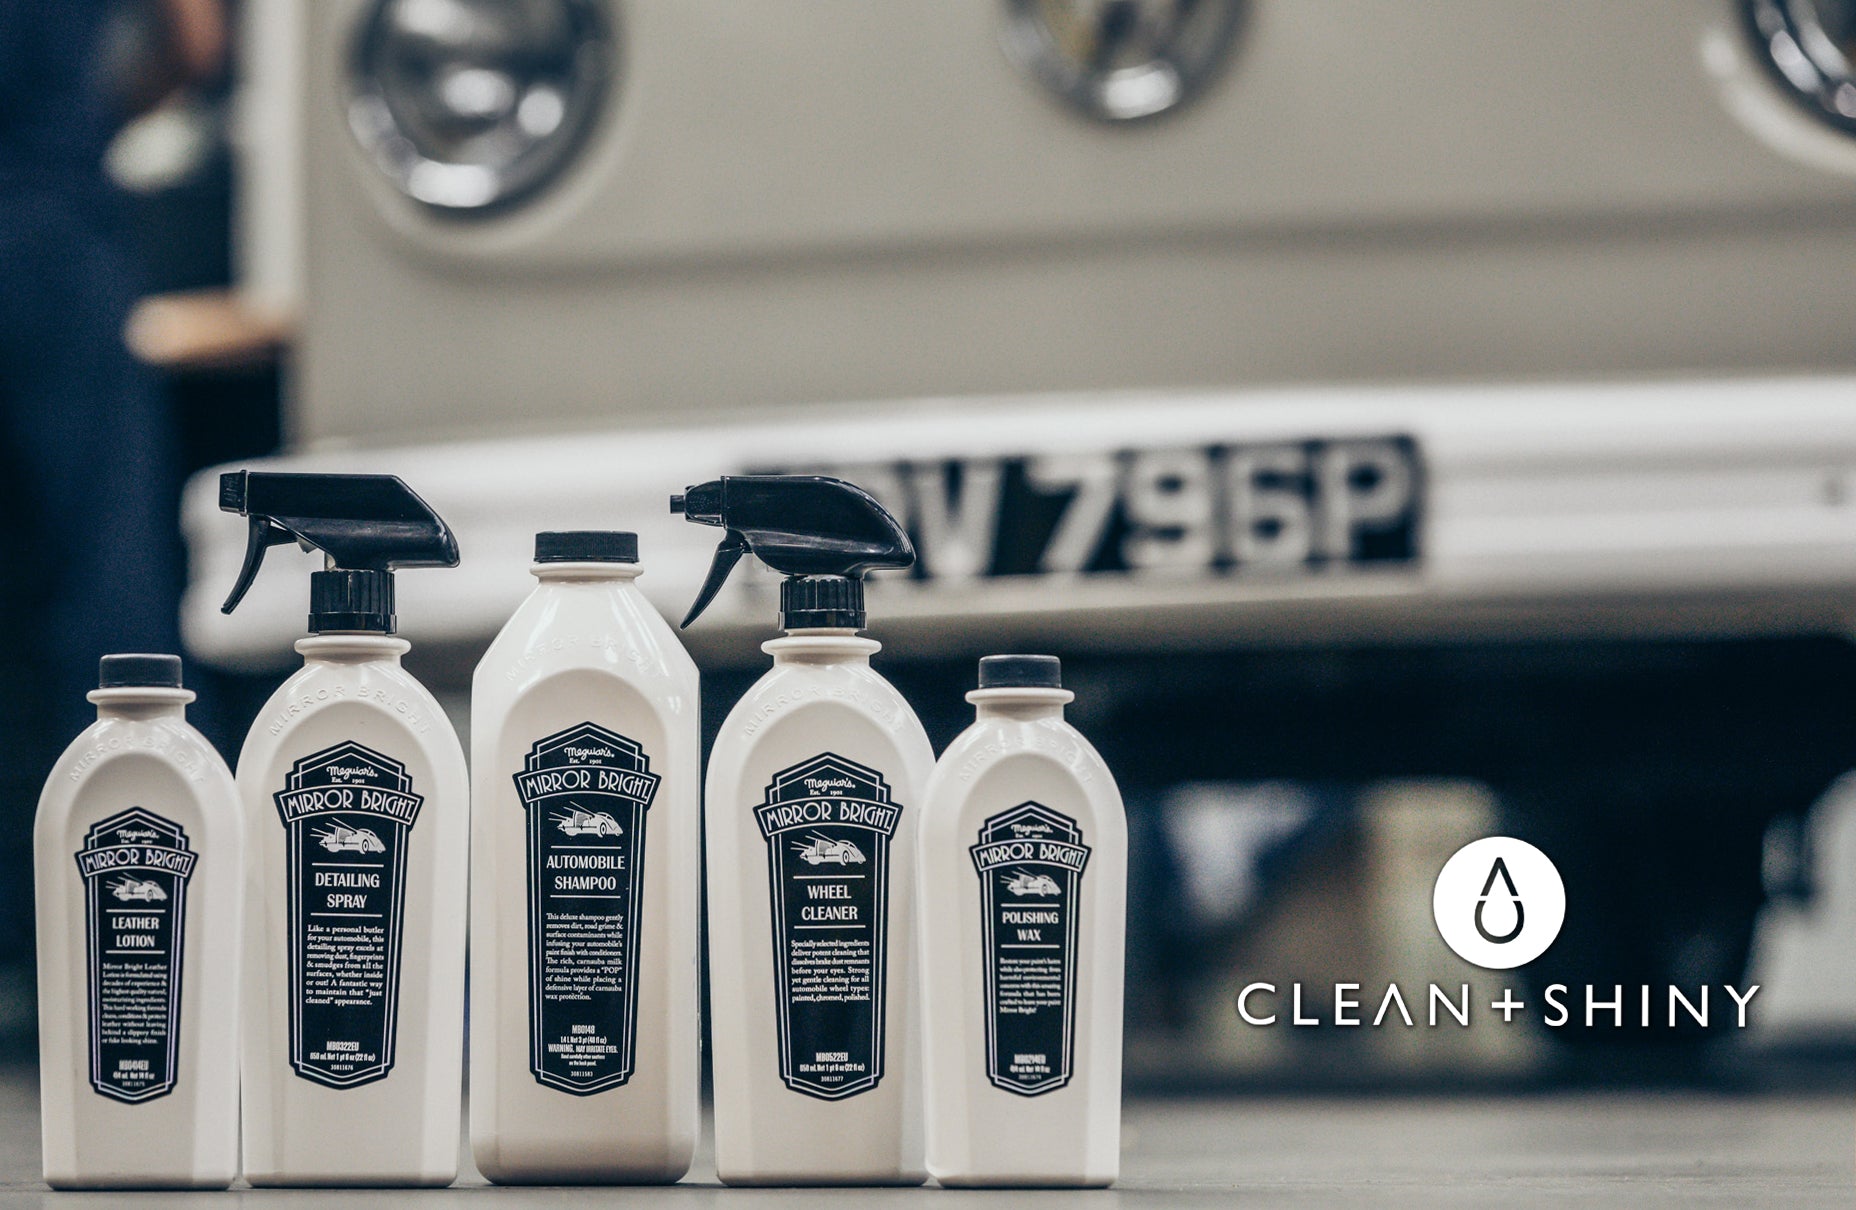 Meguiars Mirror Bright Range Now Available At Clean + Shiny